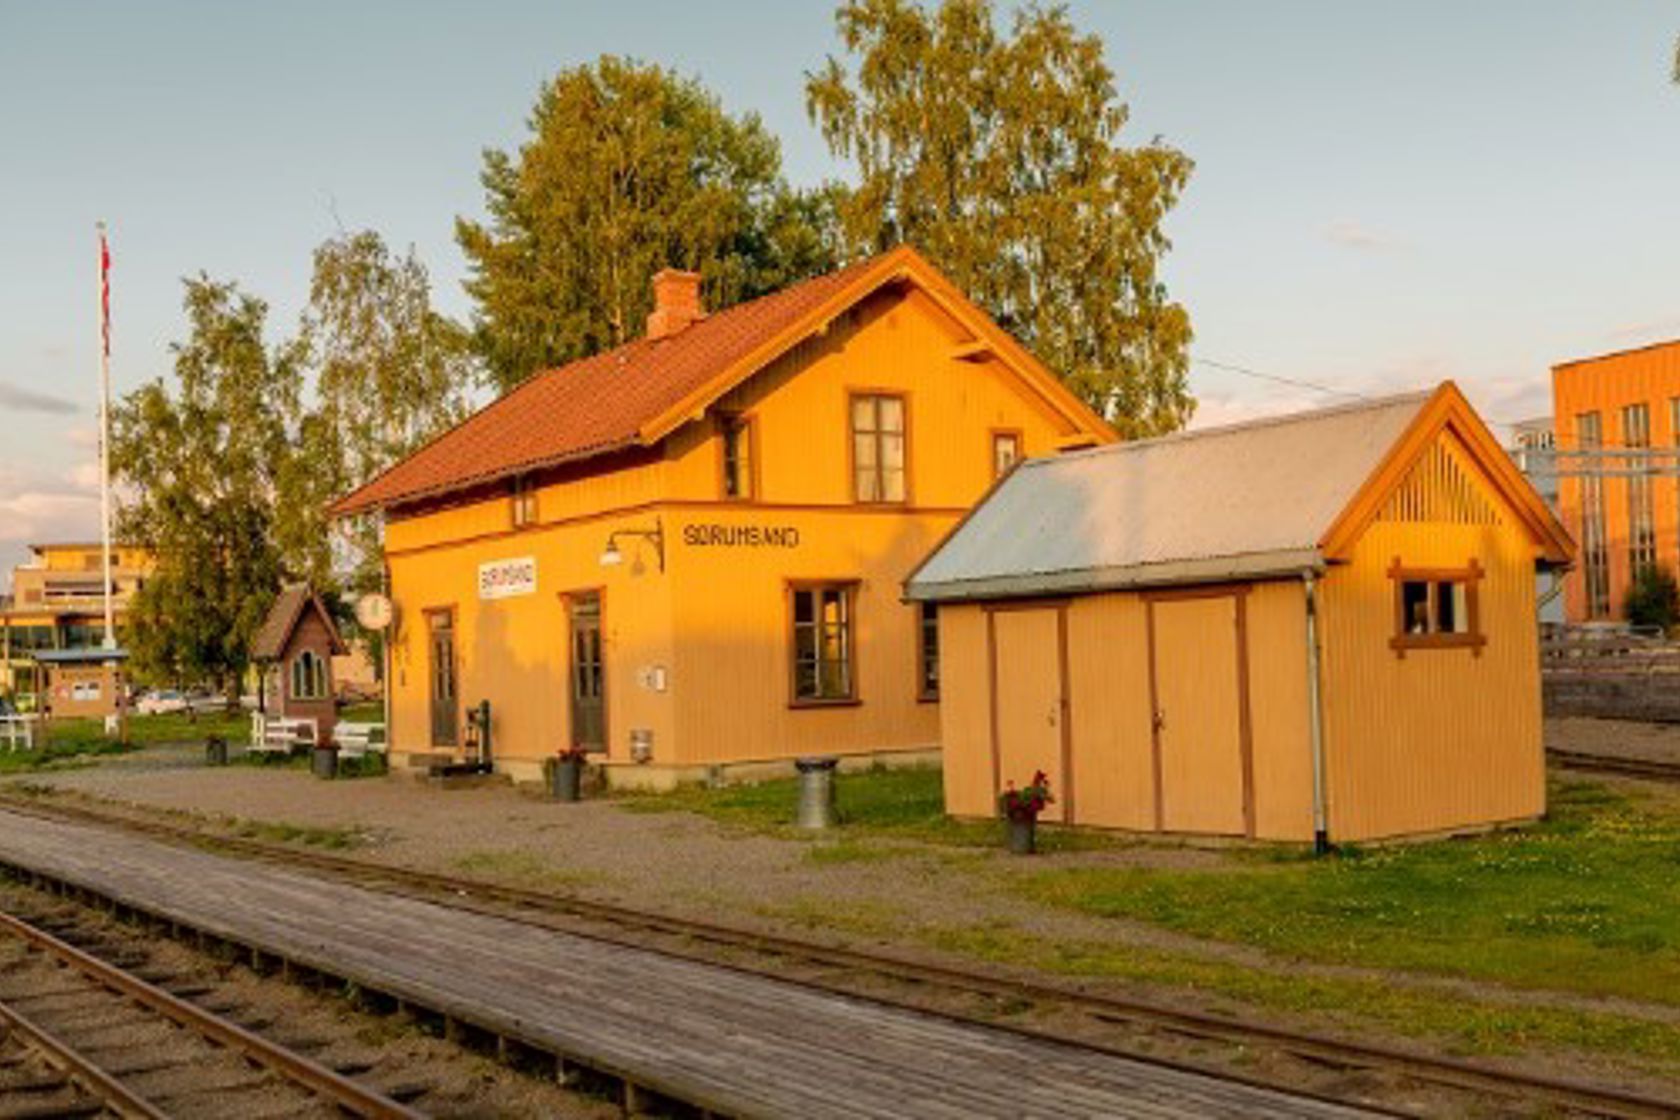 Exterior view of Sørumsand station